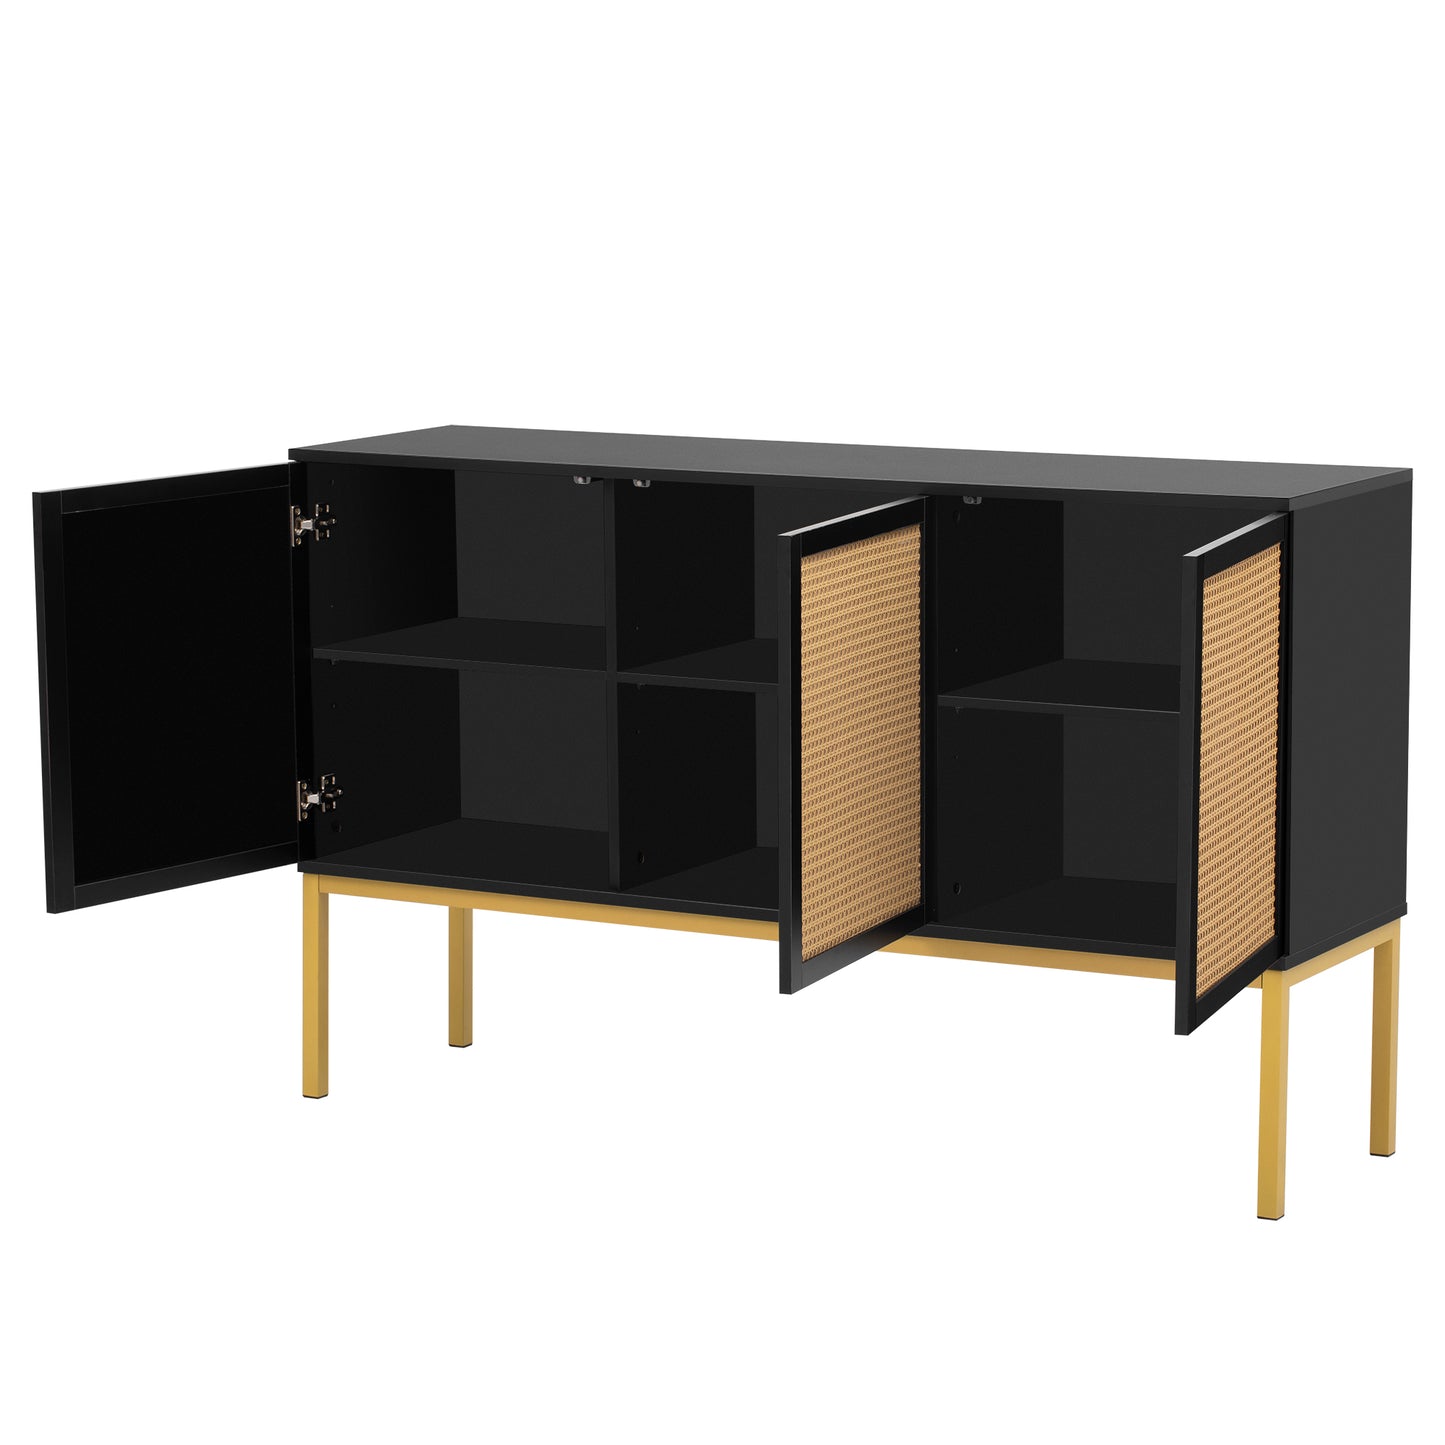 Large Storage Space Sideboard with Artificial Rattan Door